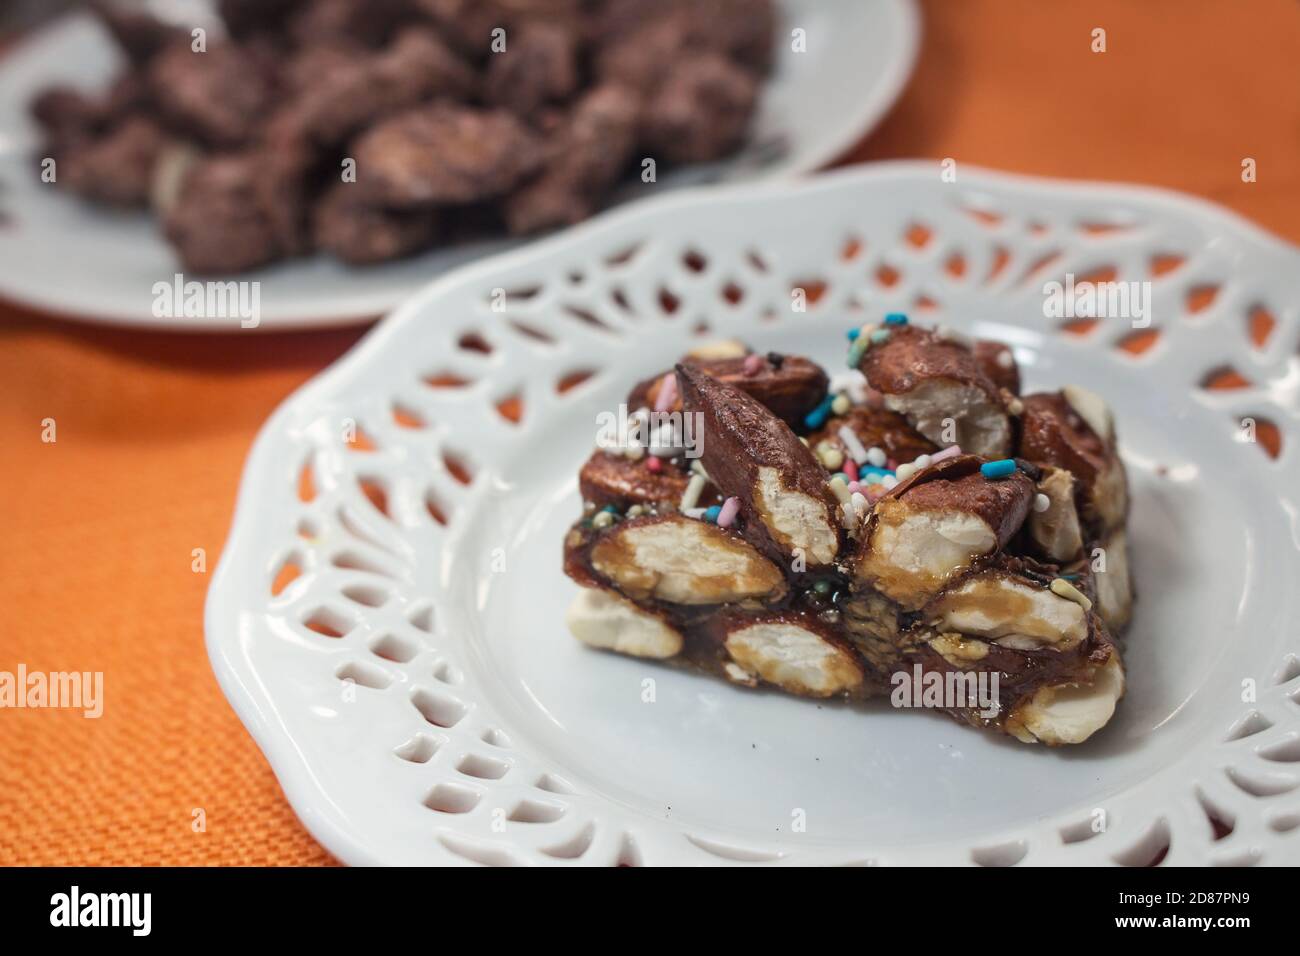 Typical Sicilian dessert: a piece of nougat made with Avola almonds called 'minnulata', against the background of caramelized almonds Stock Photo